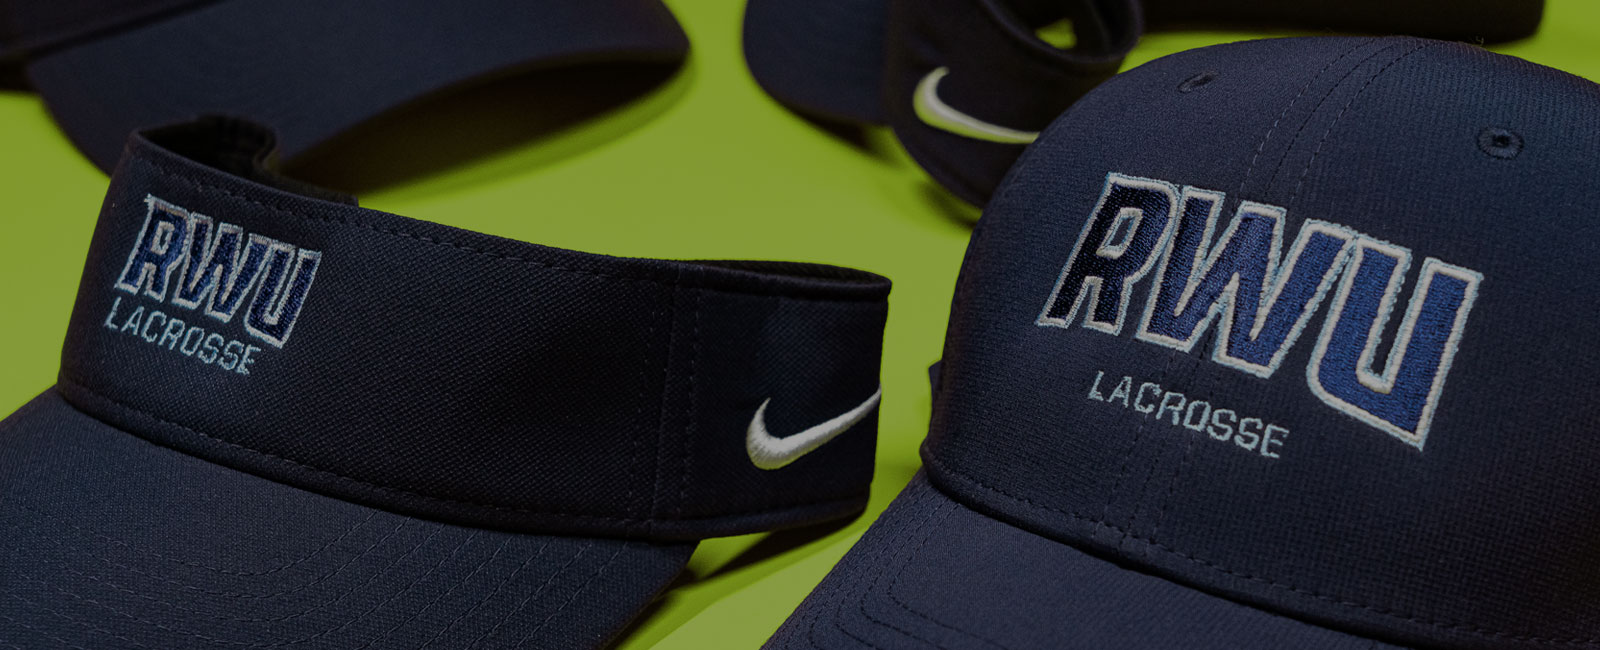 Customize Headwear for Your Team's Loyal Fanbase